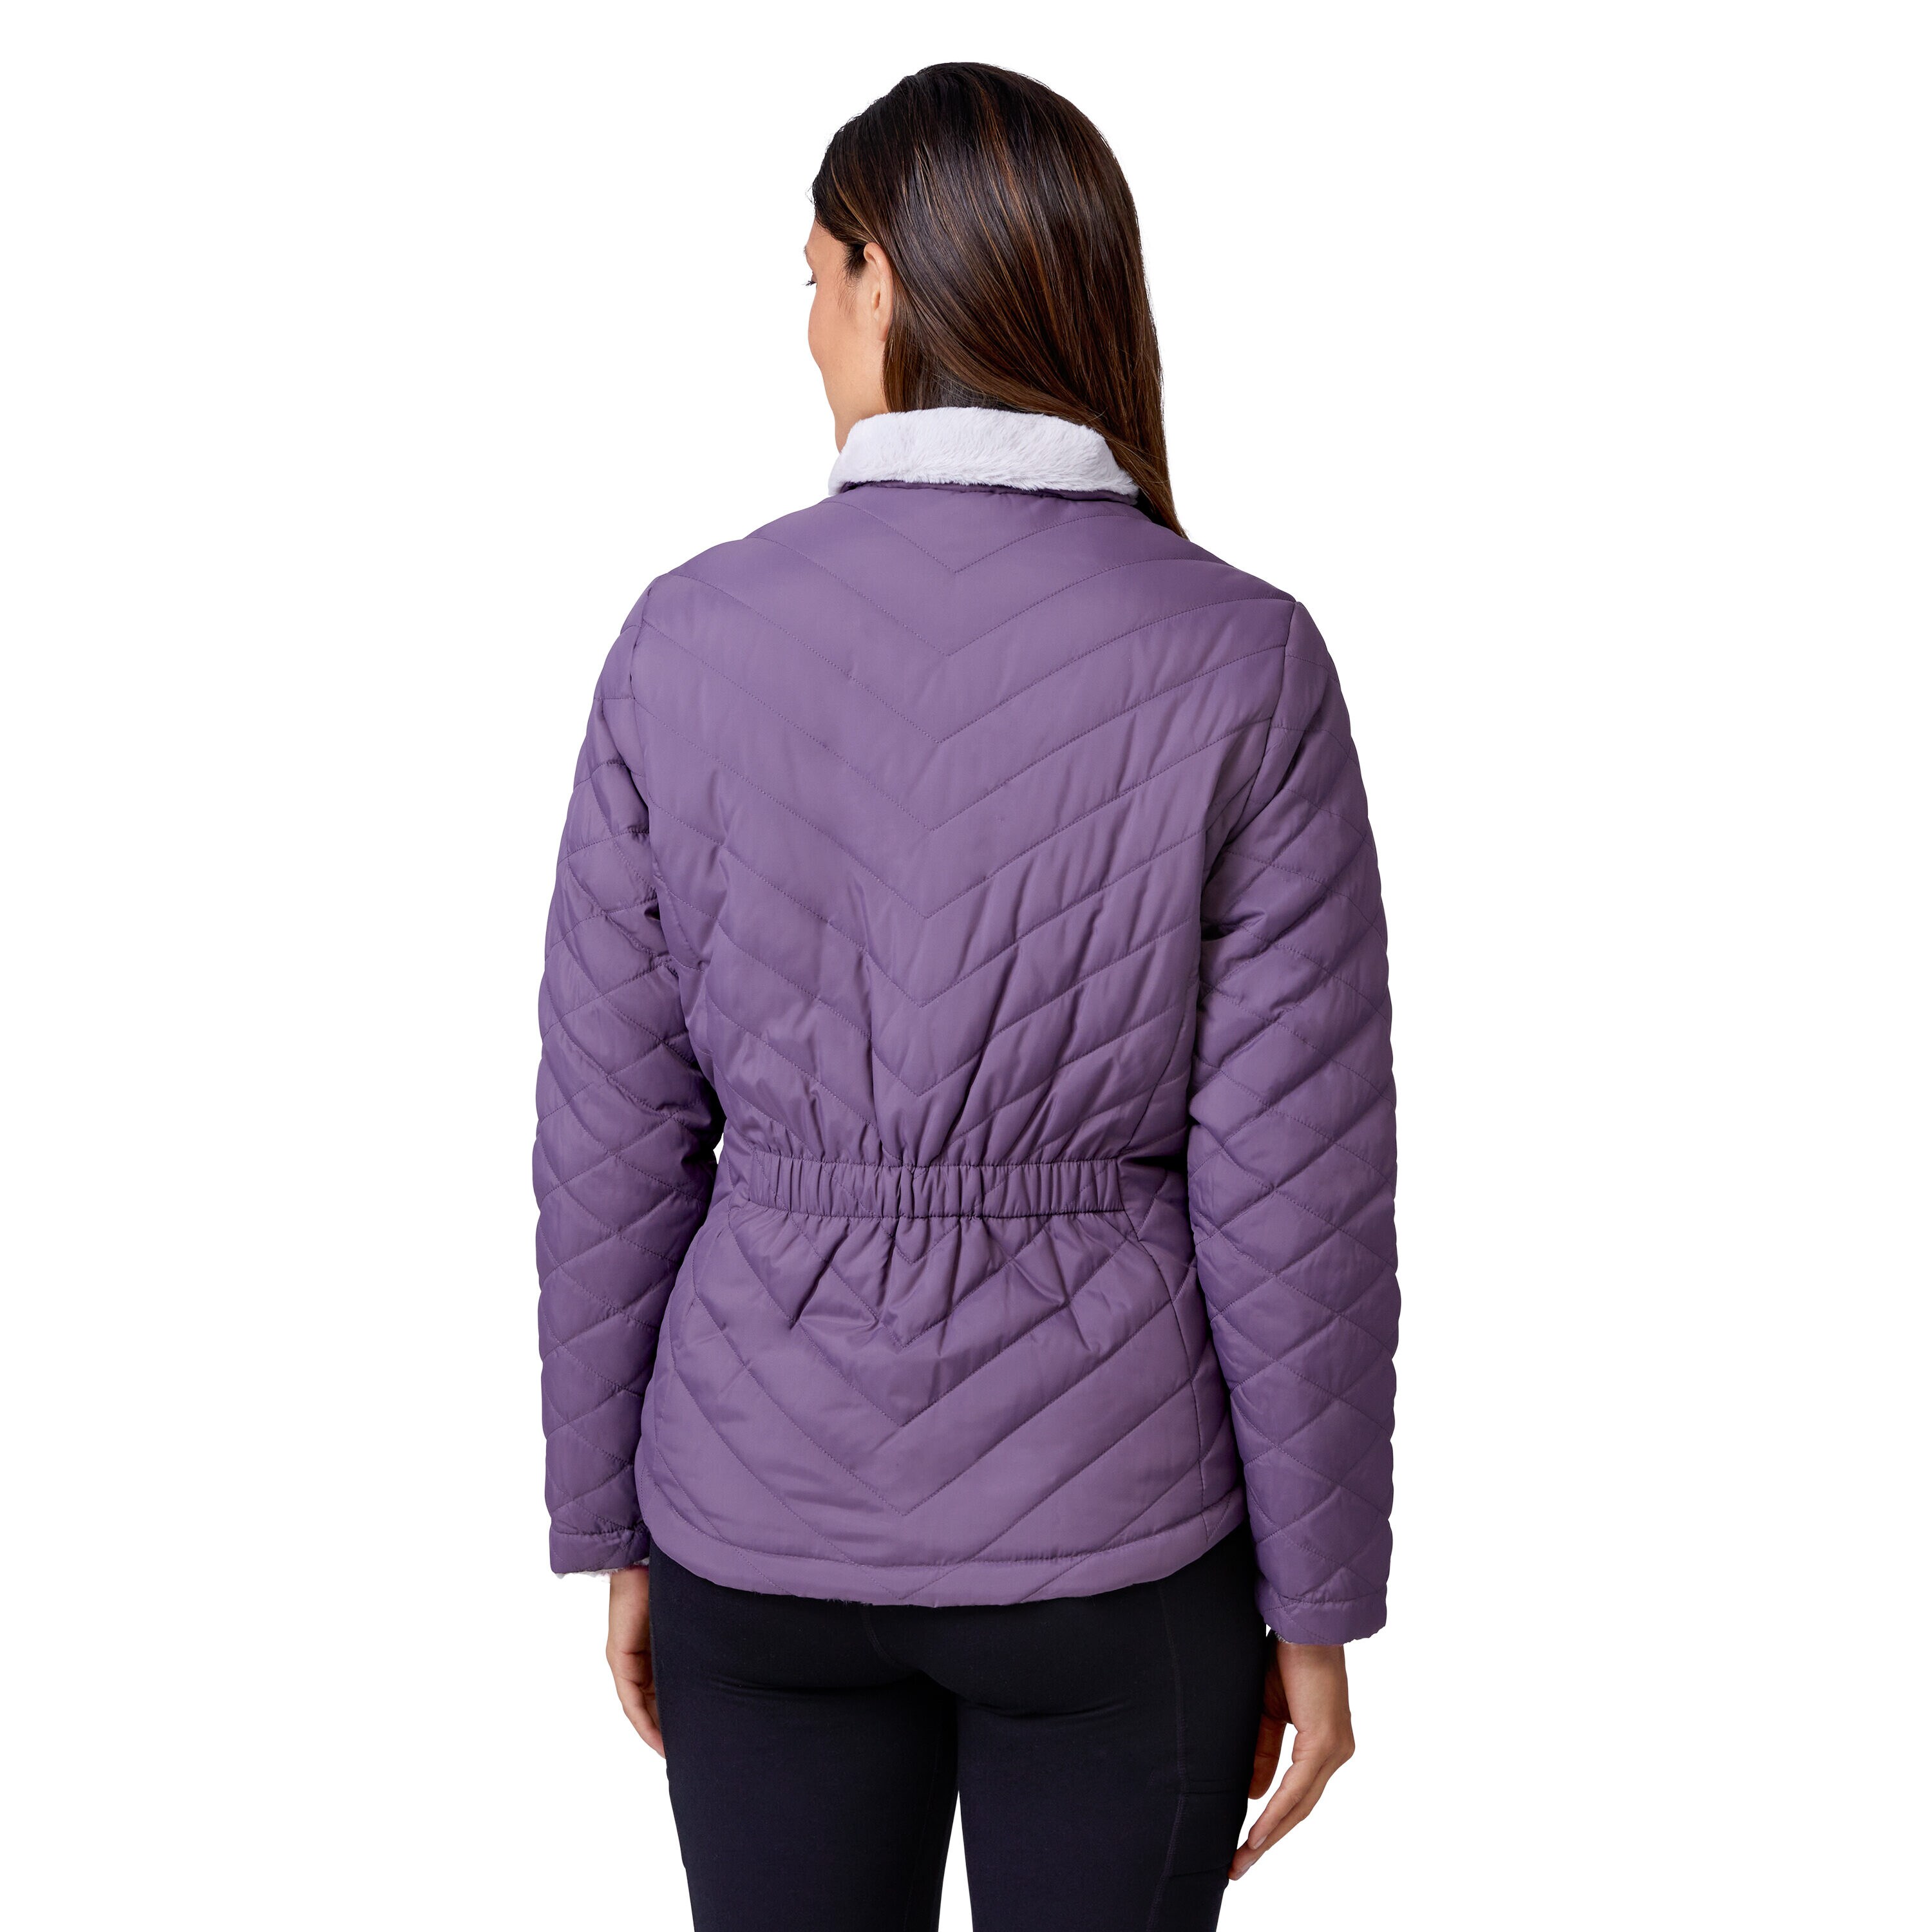 Ladies Colorblock Value Fleece Jacket popular quality apparel With soft,  lightweight, and warm synthetic fabric Women Jacket, RADYAN